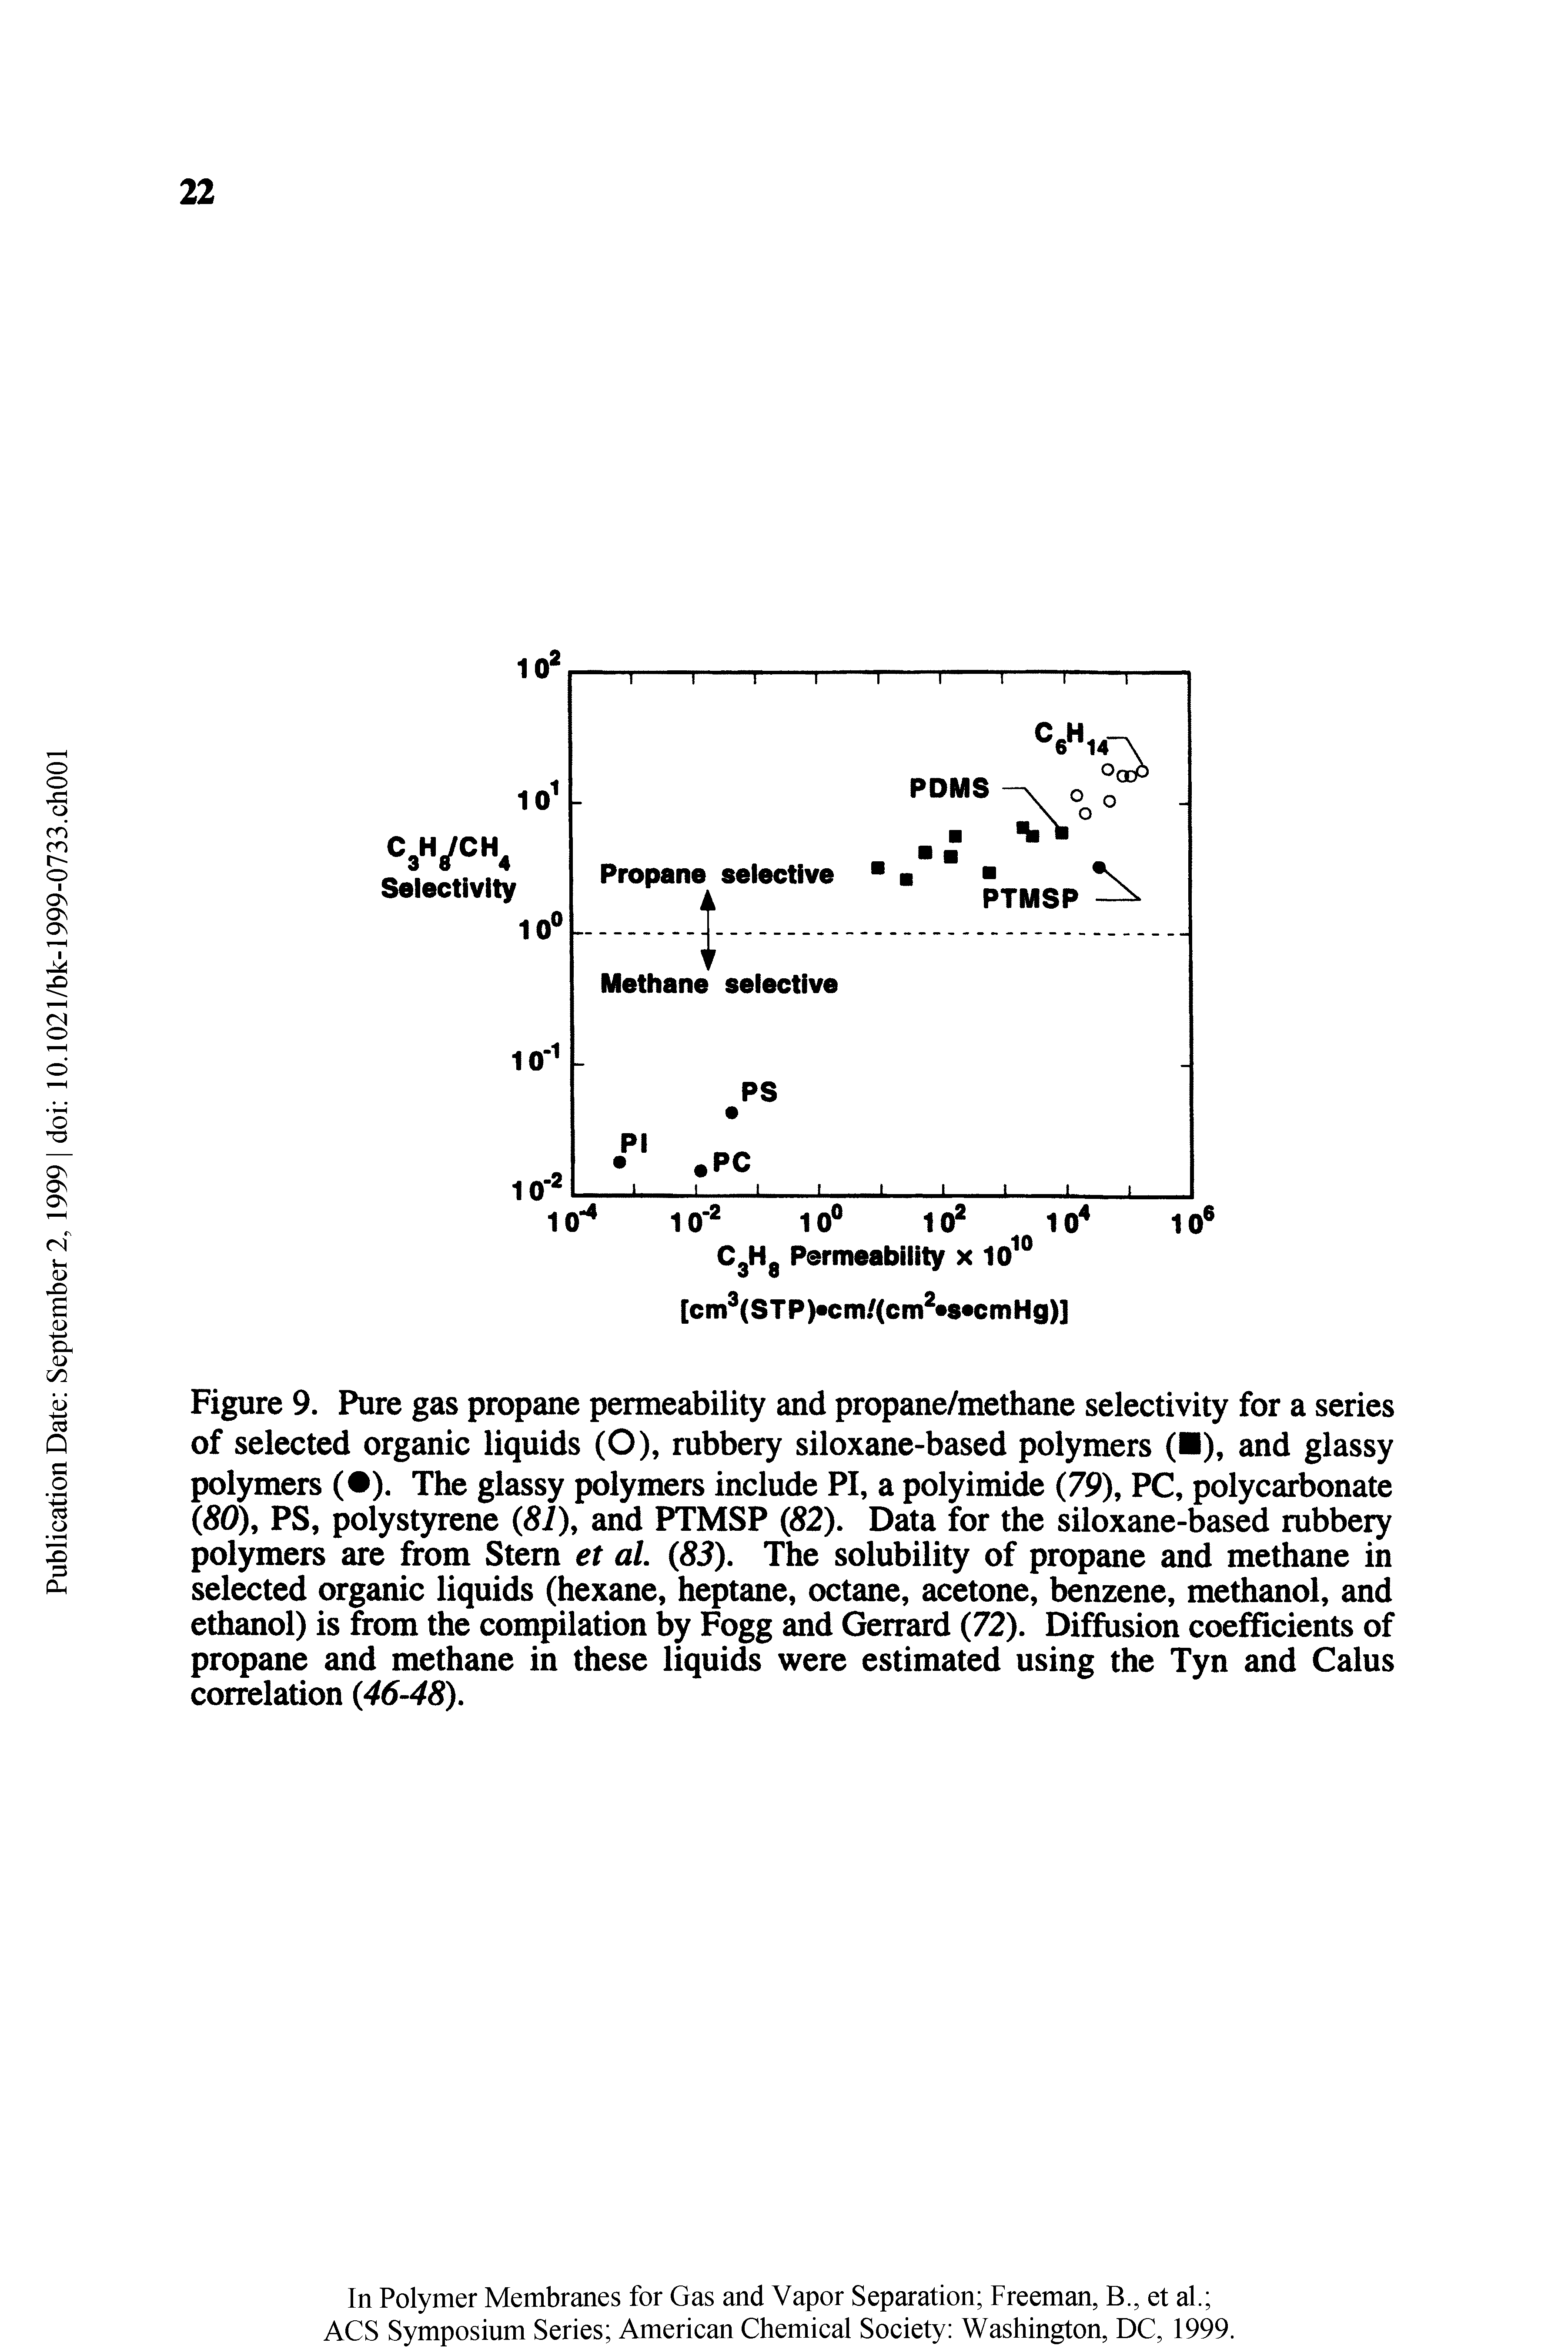 Figure 9. Pure gas propane permeability and propane/methane selectivity for a series of selected organic liquids (O), rubbery siloxane-based polymers ( ), and glassy polymers ( ). The glassy polymers include PI, a polyimide (79), PC, polycarbonate (80), PS, polystyrene (81), and PTMSP (82), Data for the siloxane-based rubber polymers are from Stem et al (83), The solubility of propane and methane in selected organic liquids (hexane, heptane, octane, acetone, benzene, methanol, and ethanol) is from the compilation by Fogg and Gerrard (72). Diffusion coefficients of propane and methane in these liquids were estimated using the Tyn and Calus correlation (46 48),...